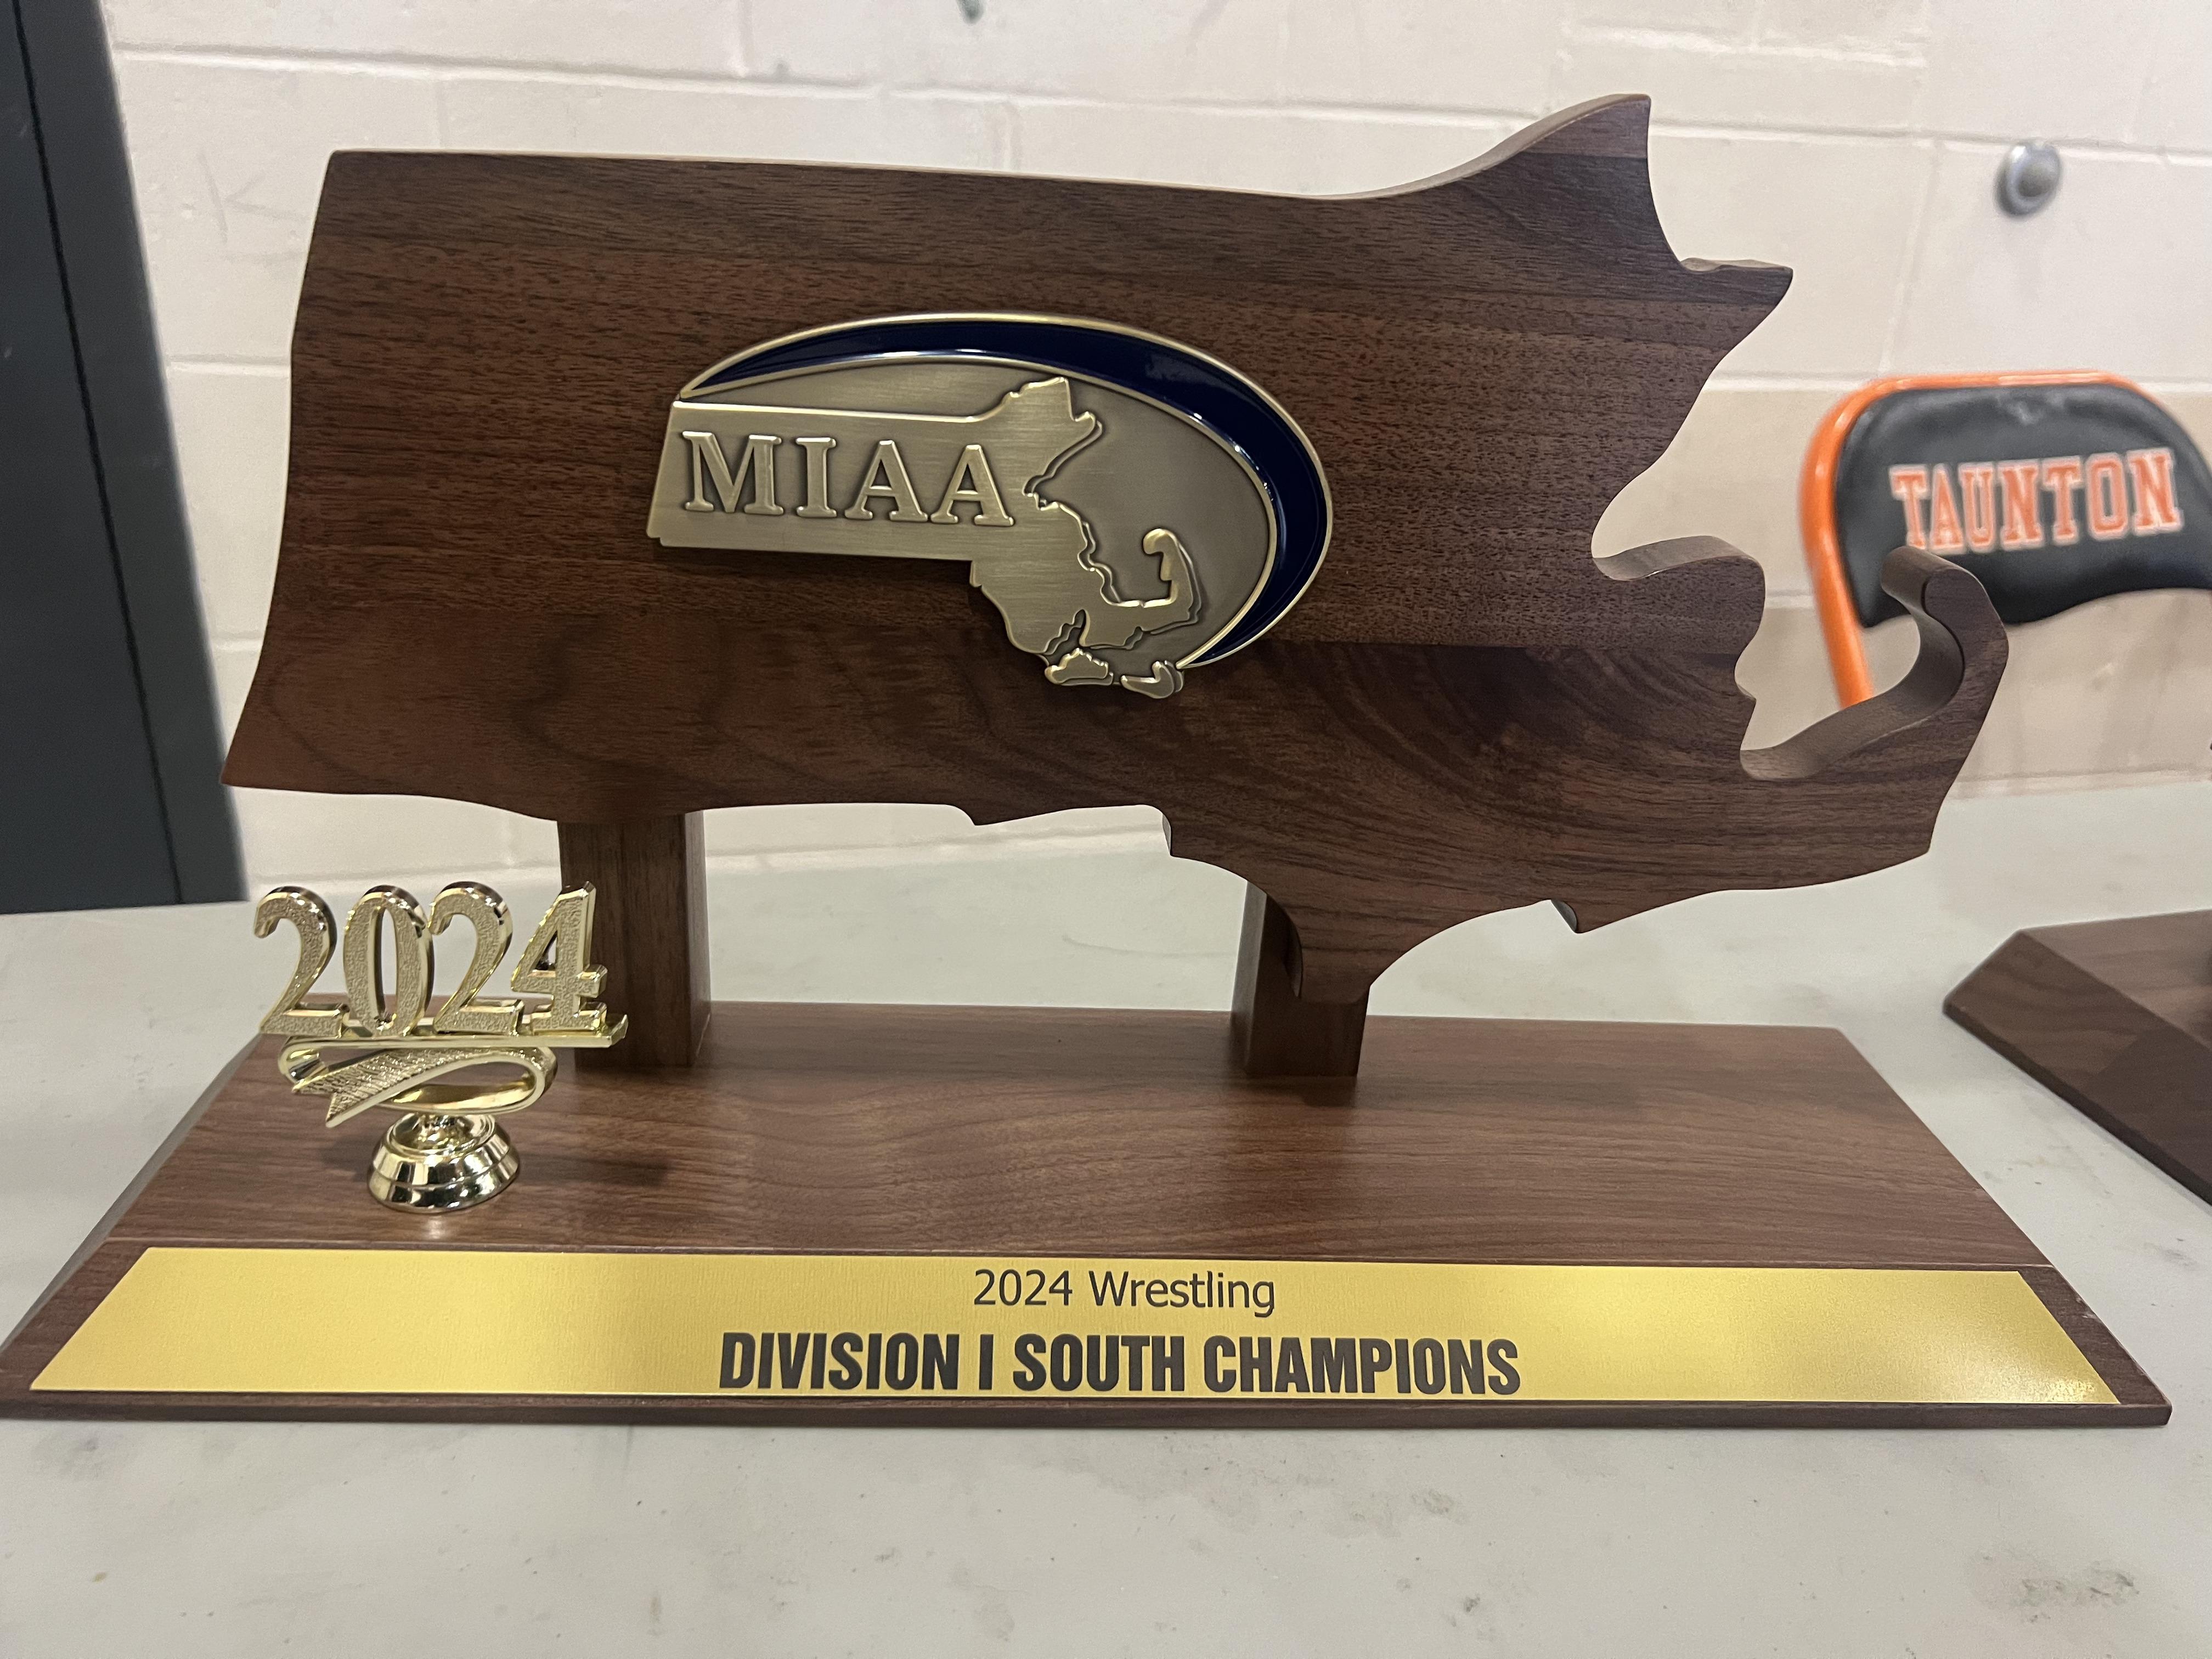 MIAA Division I South Section Trophy